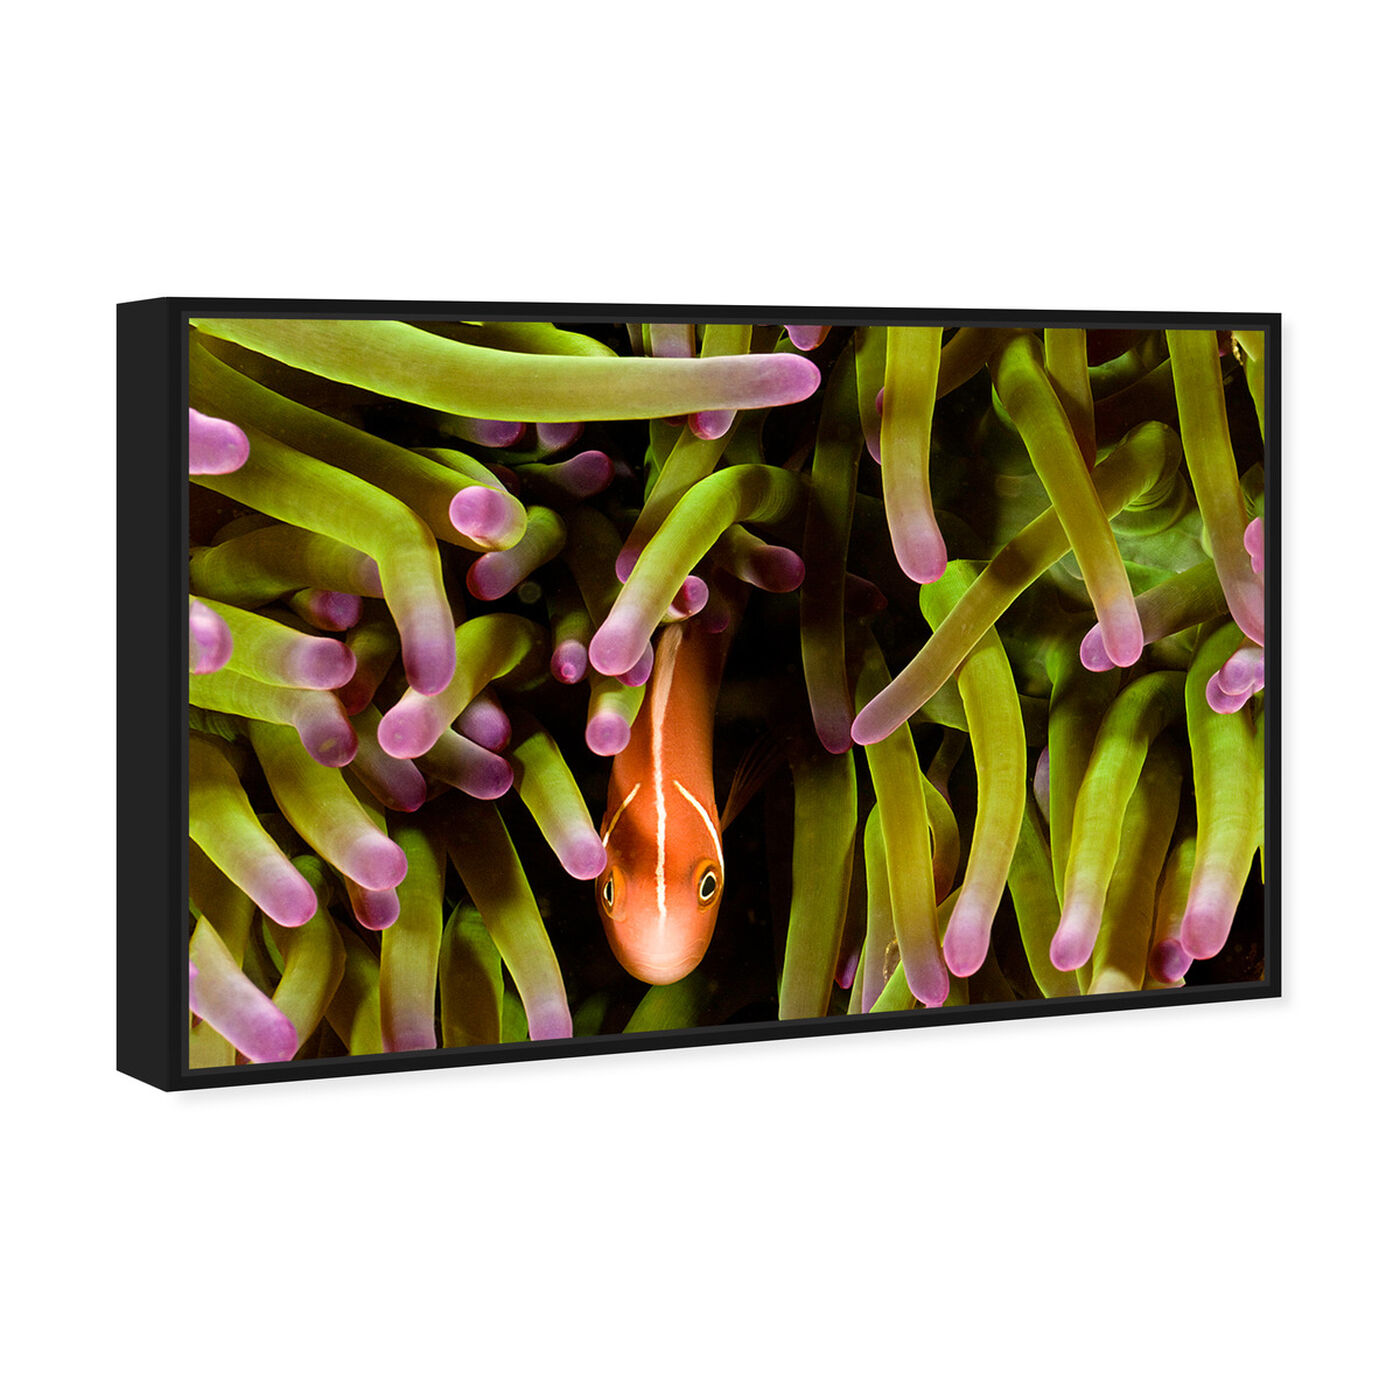 Angled view of Anemone Fish by David Fleetham featuring nautical and coastal and marine life art.